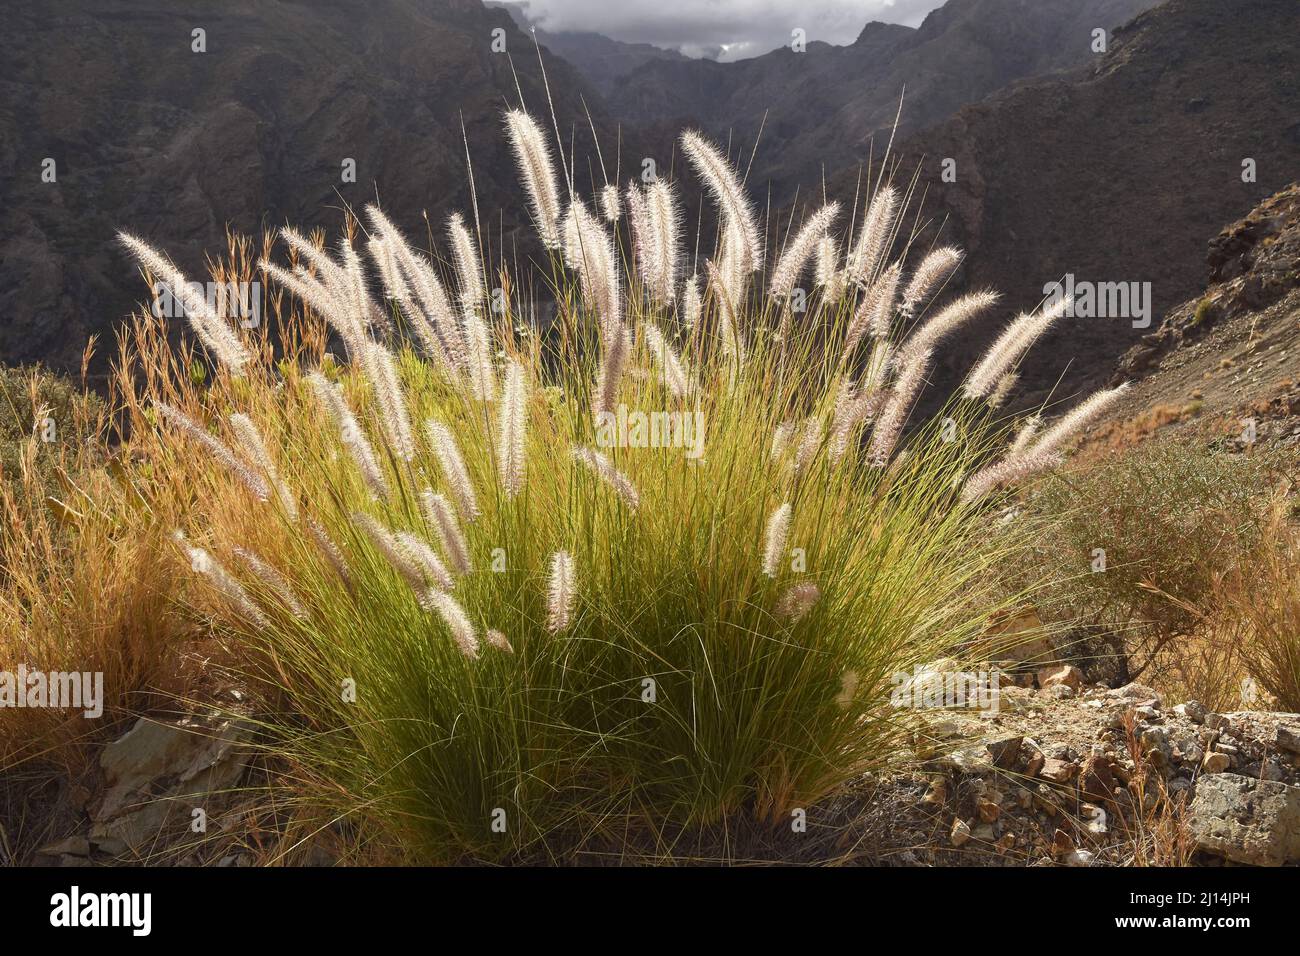 Fountain grass (Pennisetum setaceum) growing in the arid volcanic mountains of northwestern Gran Canaria Canary Islands Spain. Stock Photo